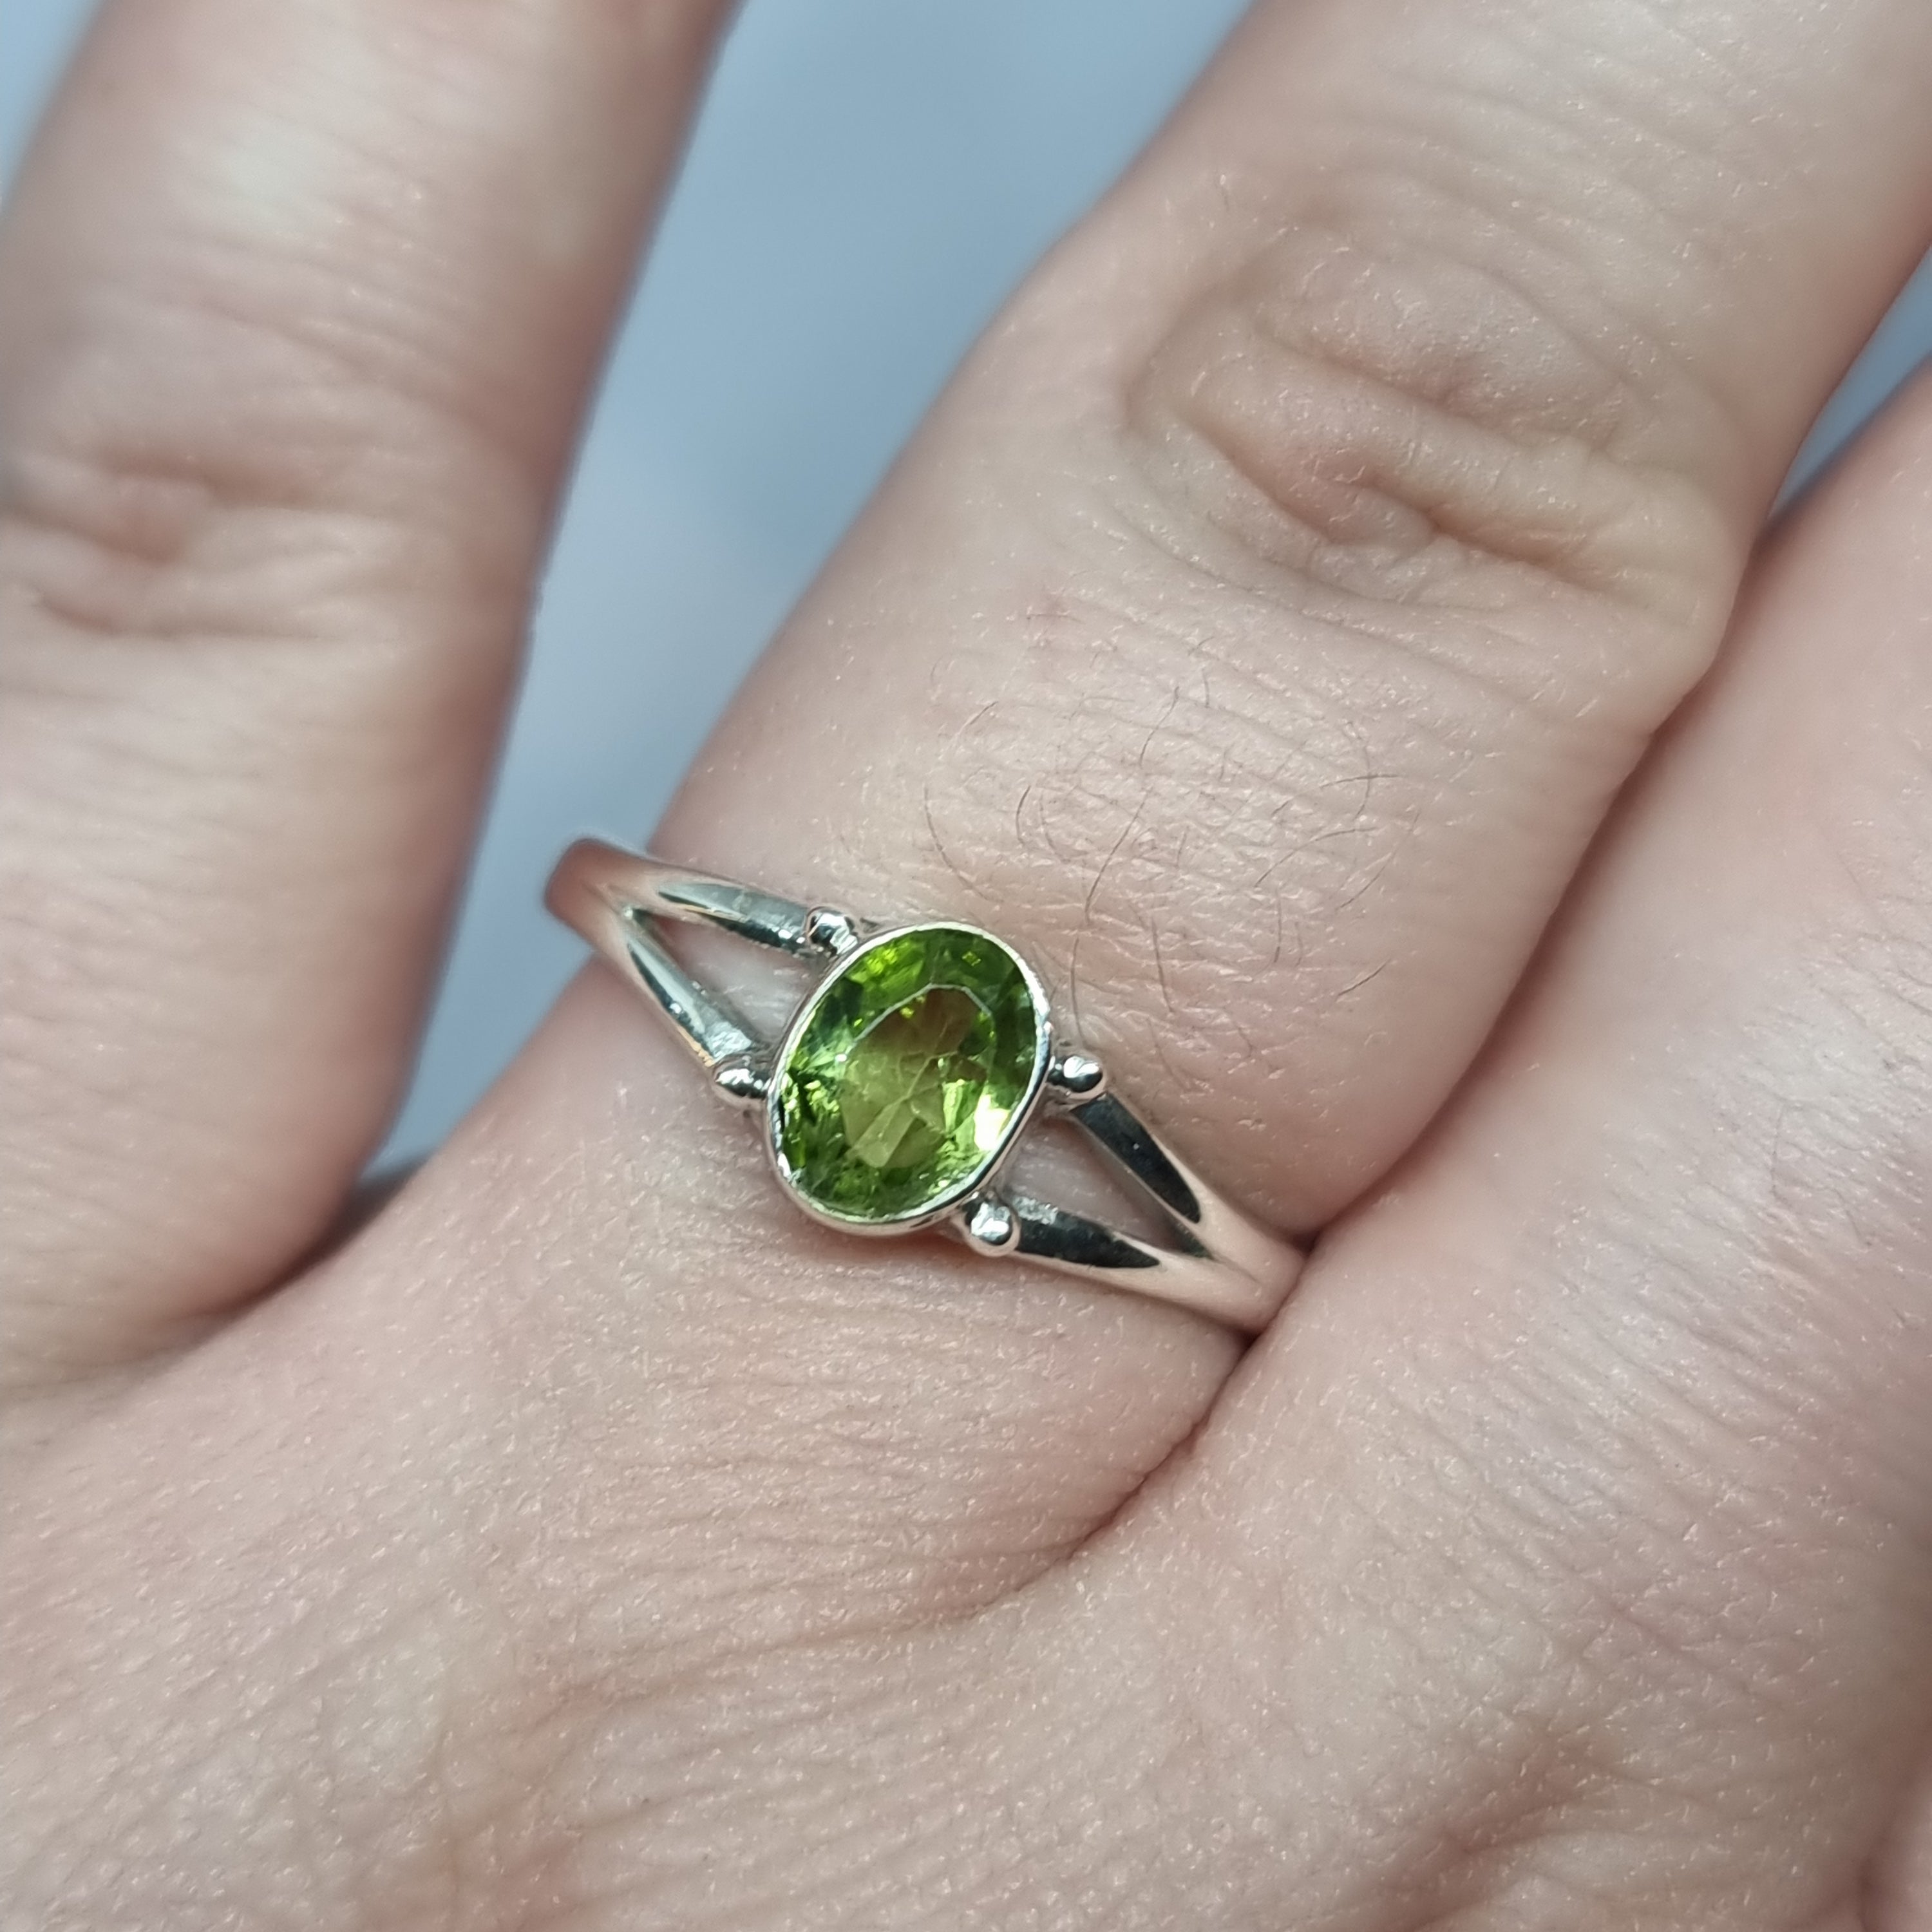 Buy Birth Stone Finger Ring(Peridot Stone) in India | Chungath Jewellery  Online- Rs. 23,390.00